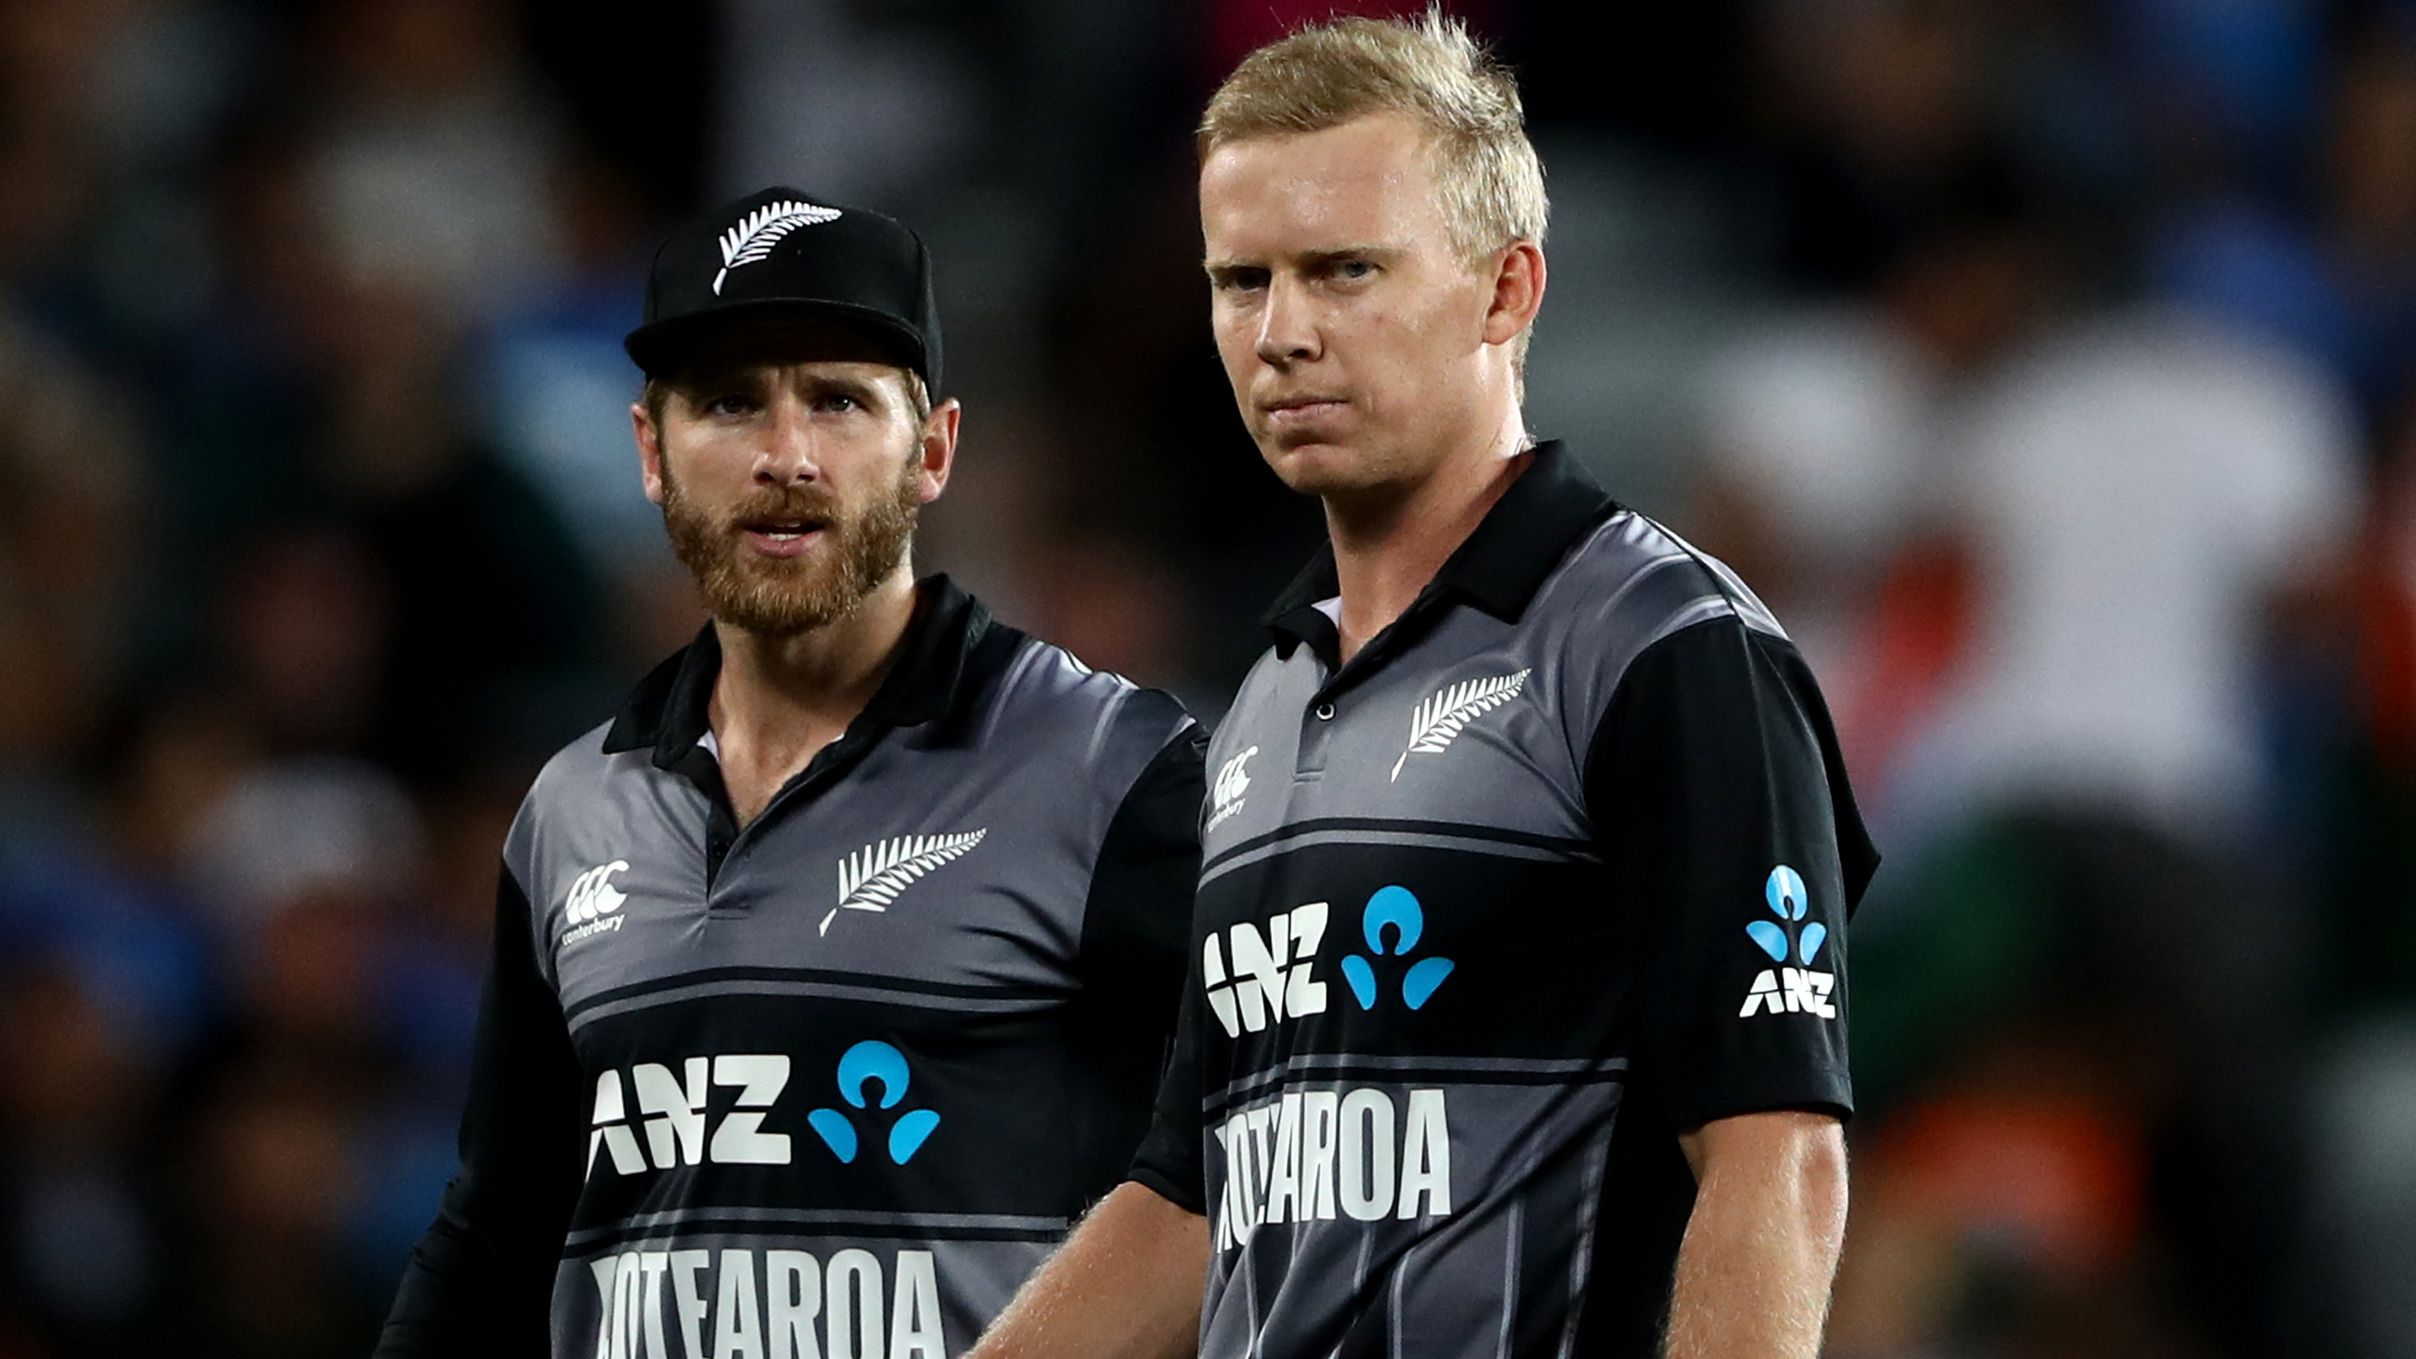 Kane Williamson talks to Scott Kuggeleijn of the Black Caps during an ODI in 2019. (Photo by Hannah Peters/Getty Images)